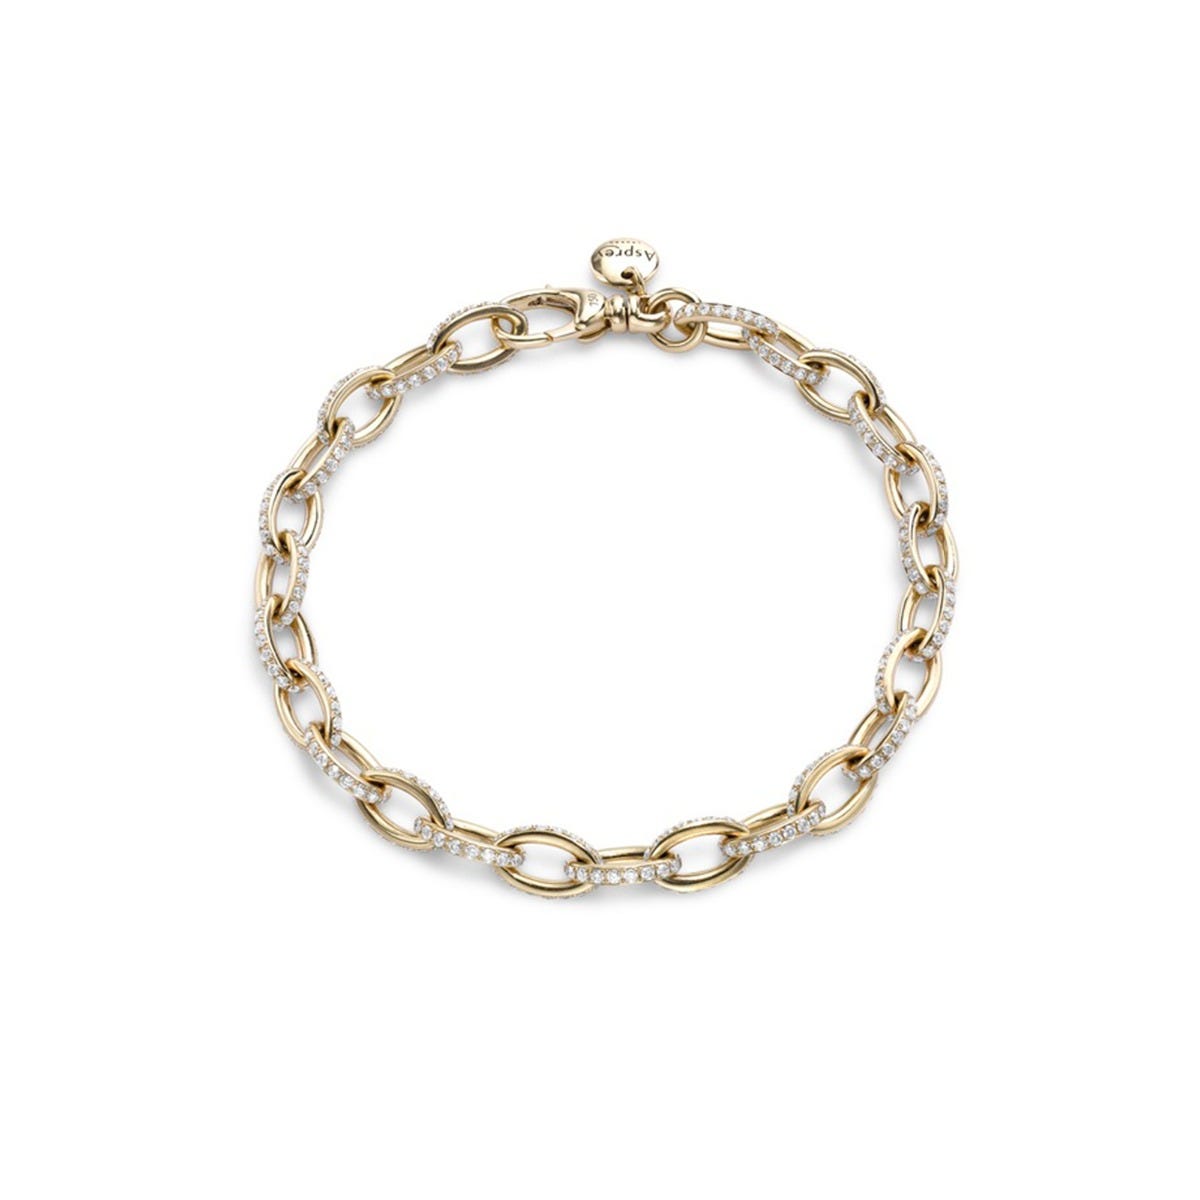 Woodland Charm Bracelet in 18ct Yellow Gold with Diamonds